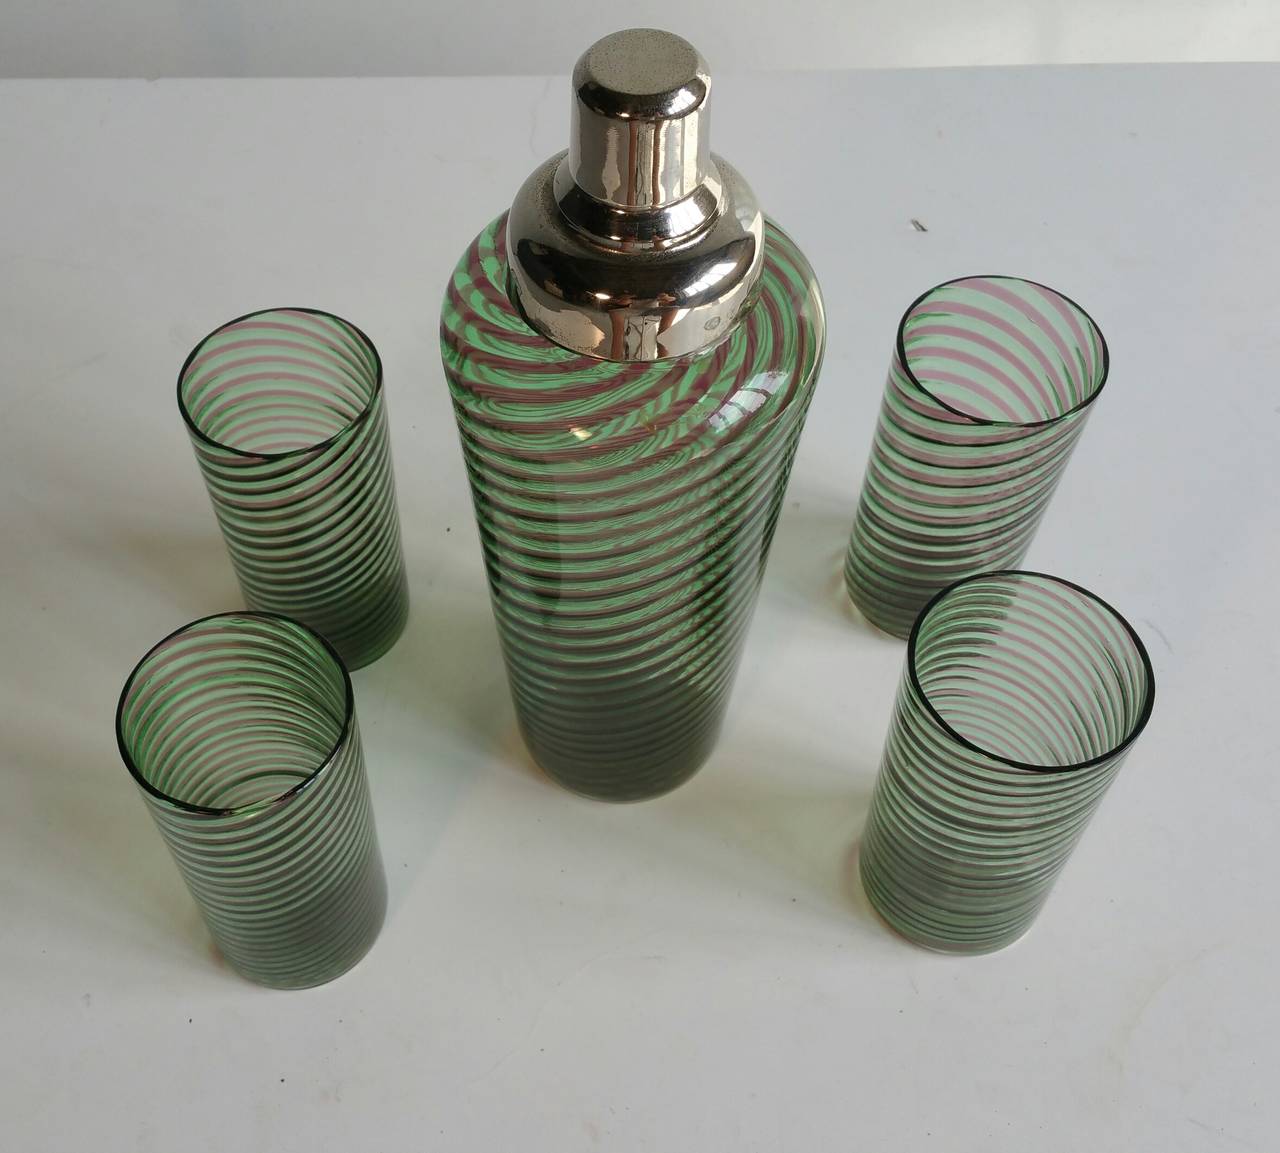 Art Glass 1950s Decanter or Vessel and Four Tumblers, in the Manner of Venini